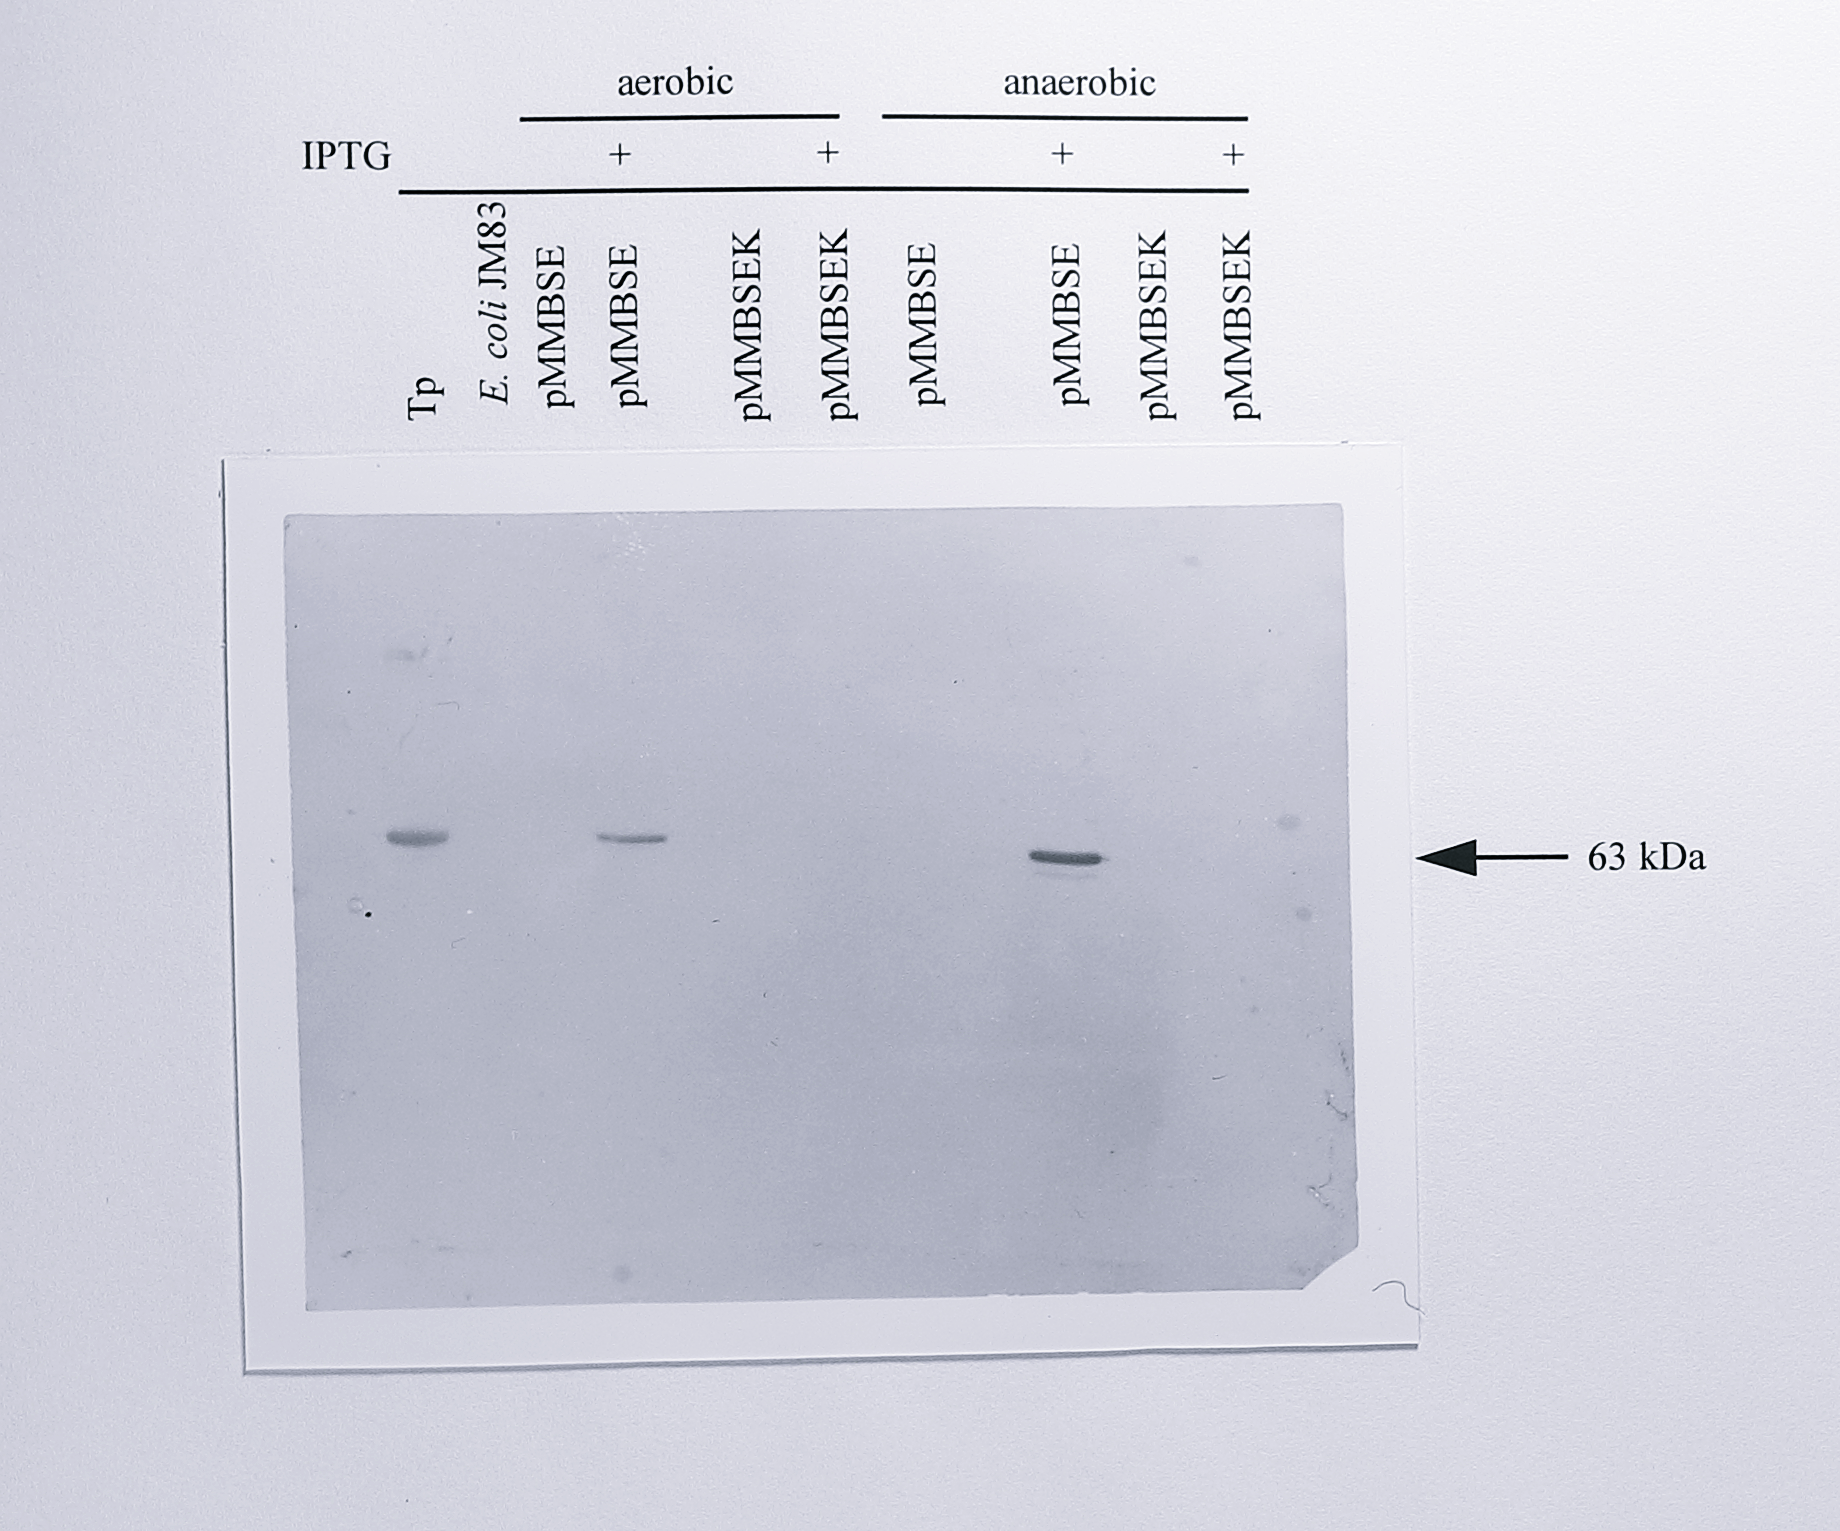 Western blot of protein samples from _E. coli_ JM83, _E. coli_ [pMMB67EH], E. coli [pMMBSEK] and _E. coli_ [pMMBSE], probed using antibody to cytochrome _cd_$_1$. 40 $\mu$g of protein from the cultures indicated above the lanes was separated by electrophoresis on an 8% SDS-PAGE gel and transferred to nitrocellulose by semi-dry electroblotting. The membrane was then probed a cytochrome _cd_$_1$ antibody, detected colorimetrically with a secondary antibody coupled to alkaline phosphatase, as detailed in Materials and Methods. The lane labelled Tp contained 20 $\mu$g of protein from a soluble extract of wild-type _T. pantotropha_ grown anaerobically with nitrate.